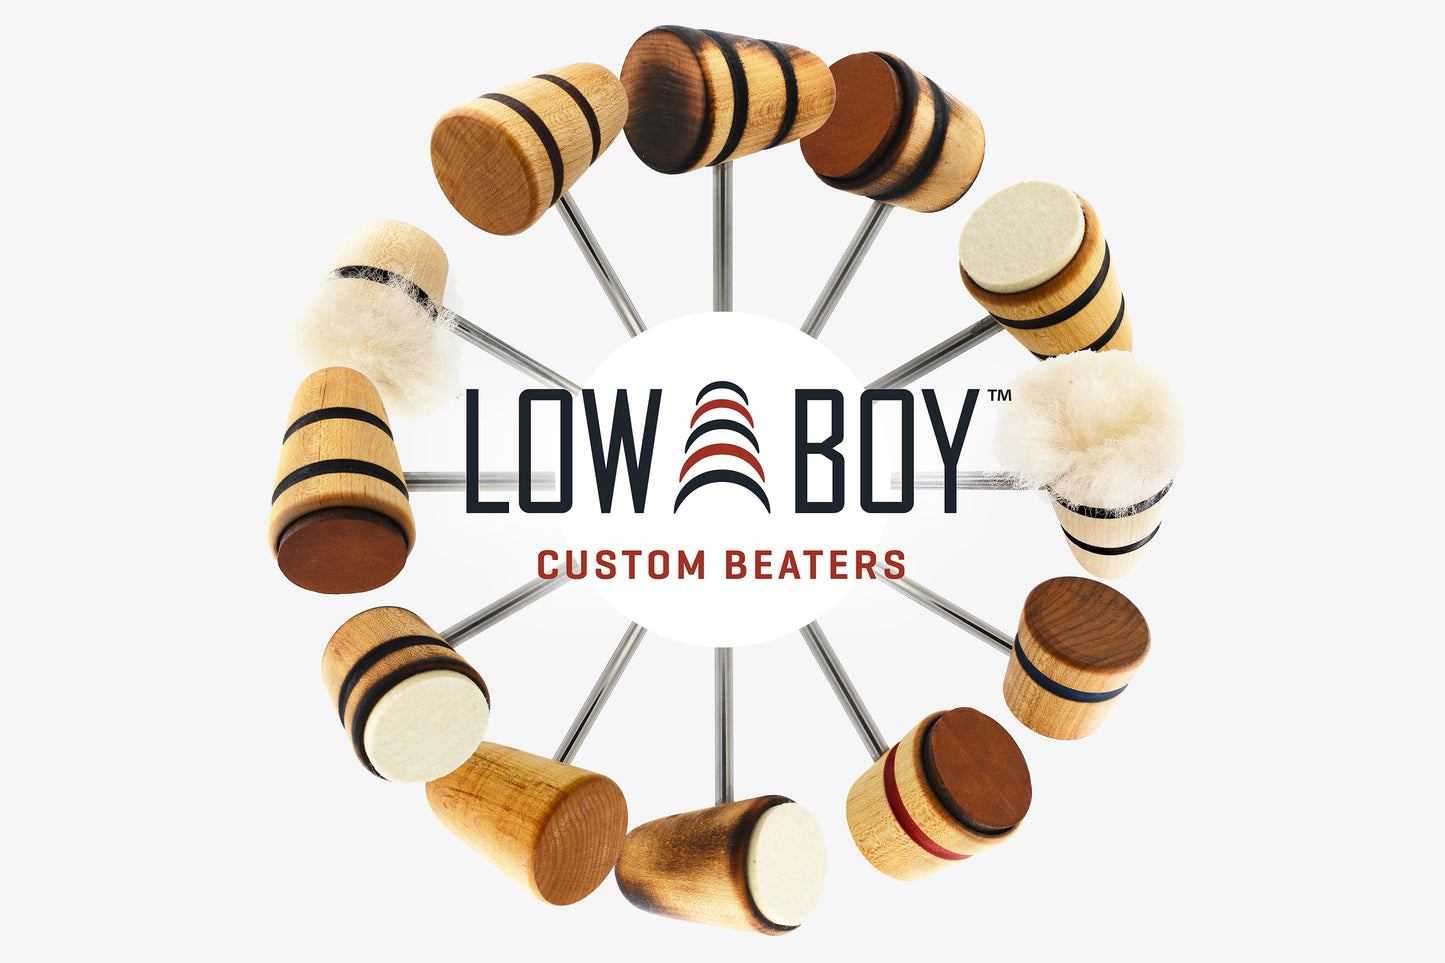 Low Boy Bass Drum Beaters